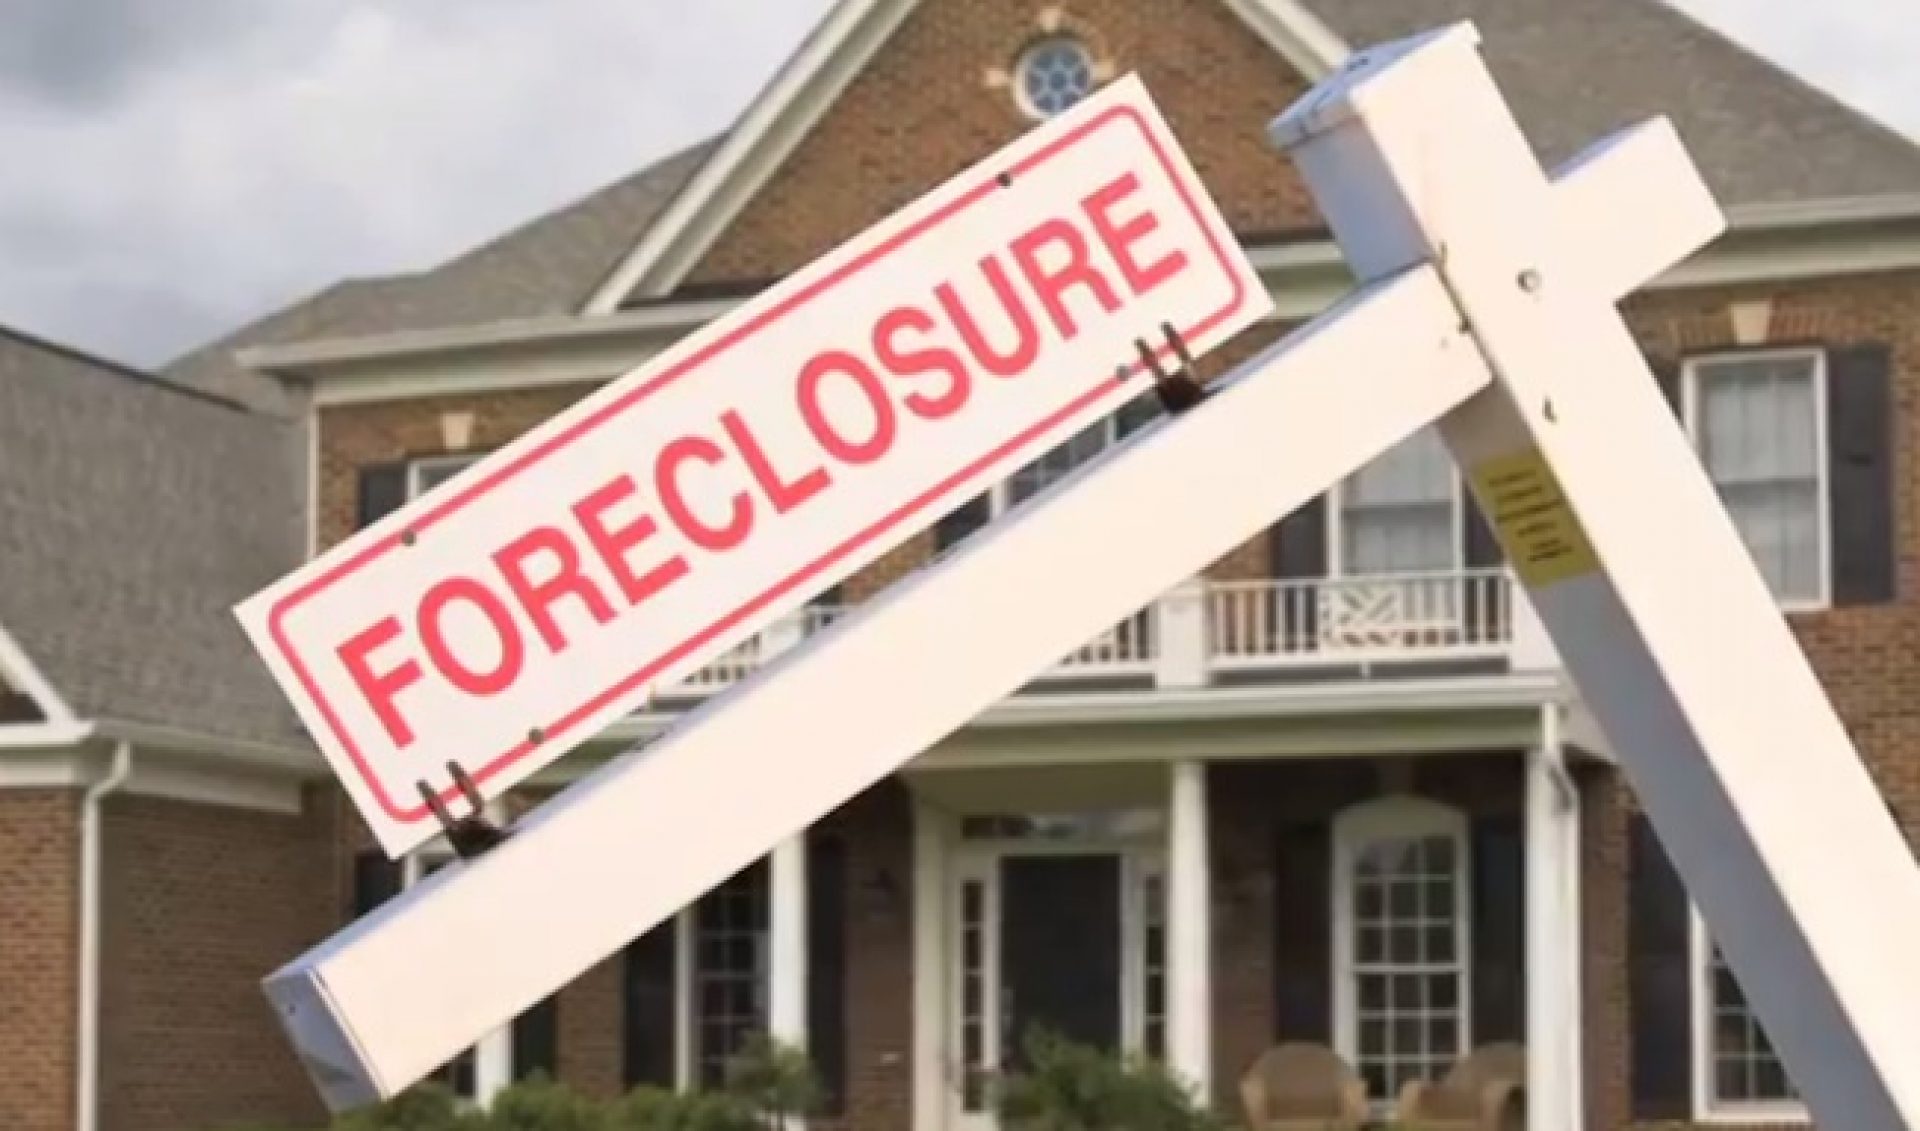 Federal Reserve Turns to YouTube to Promote Foreclosure Reviews